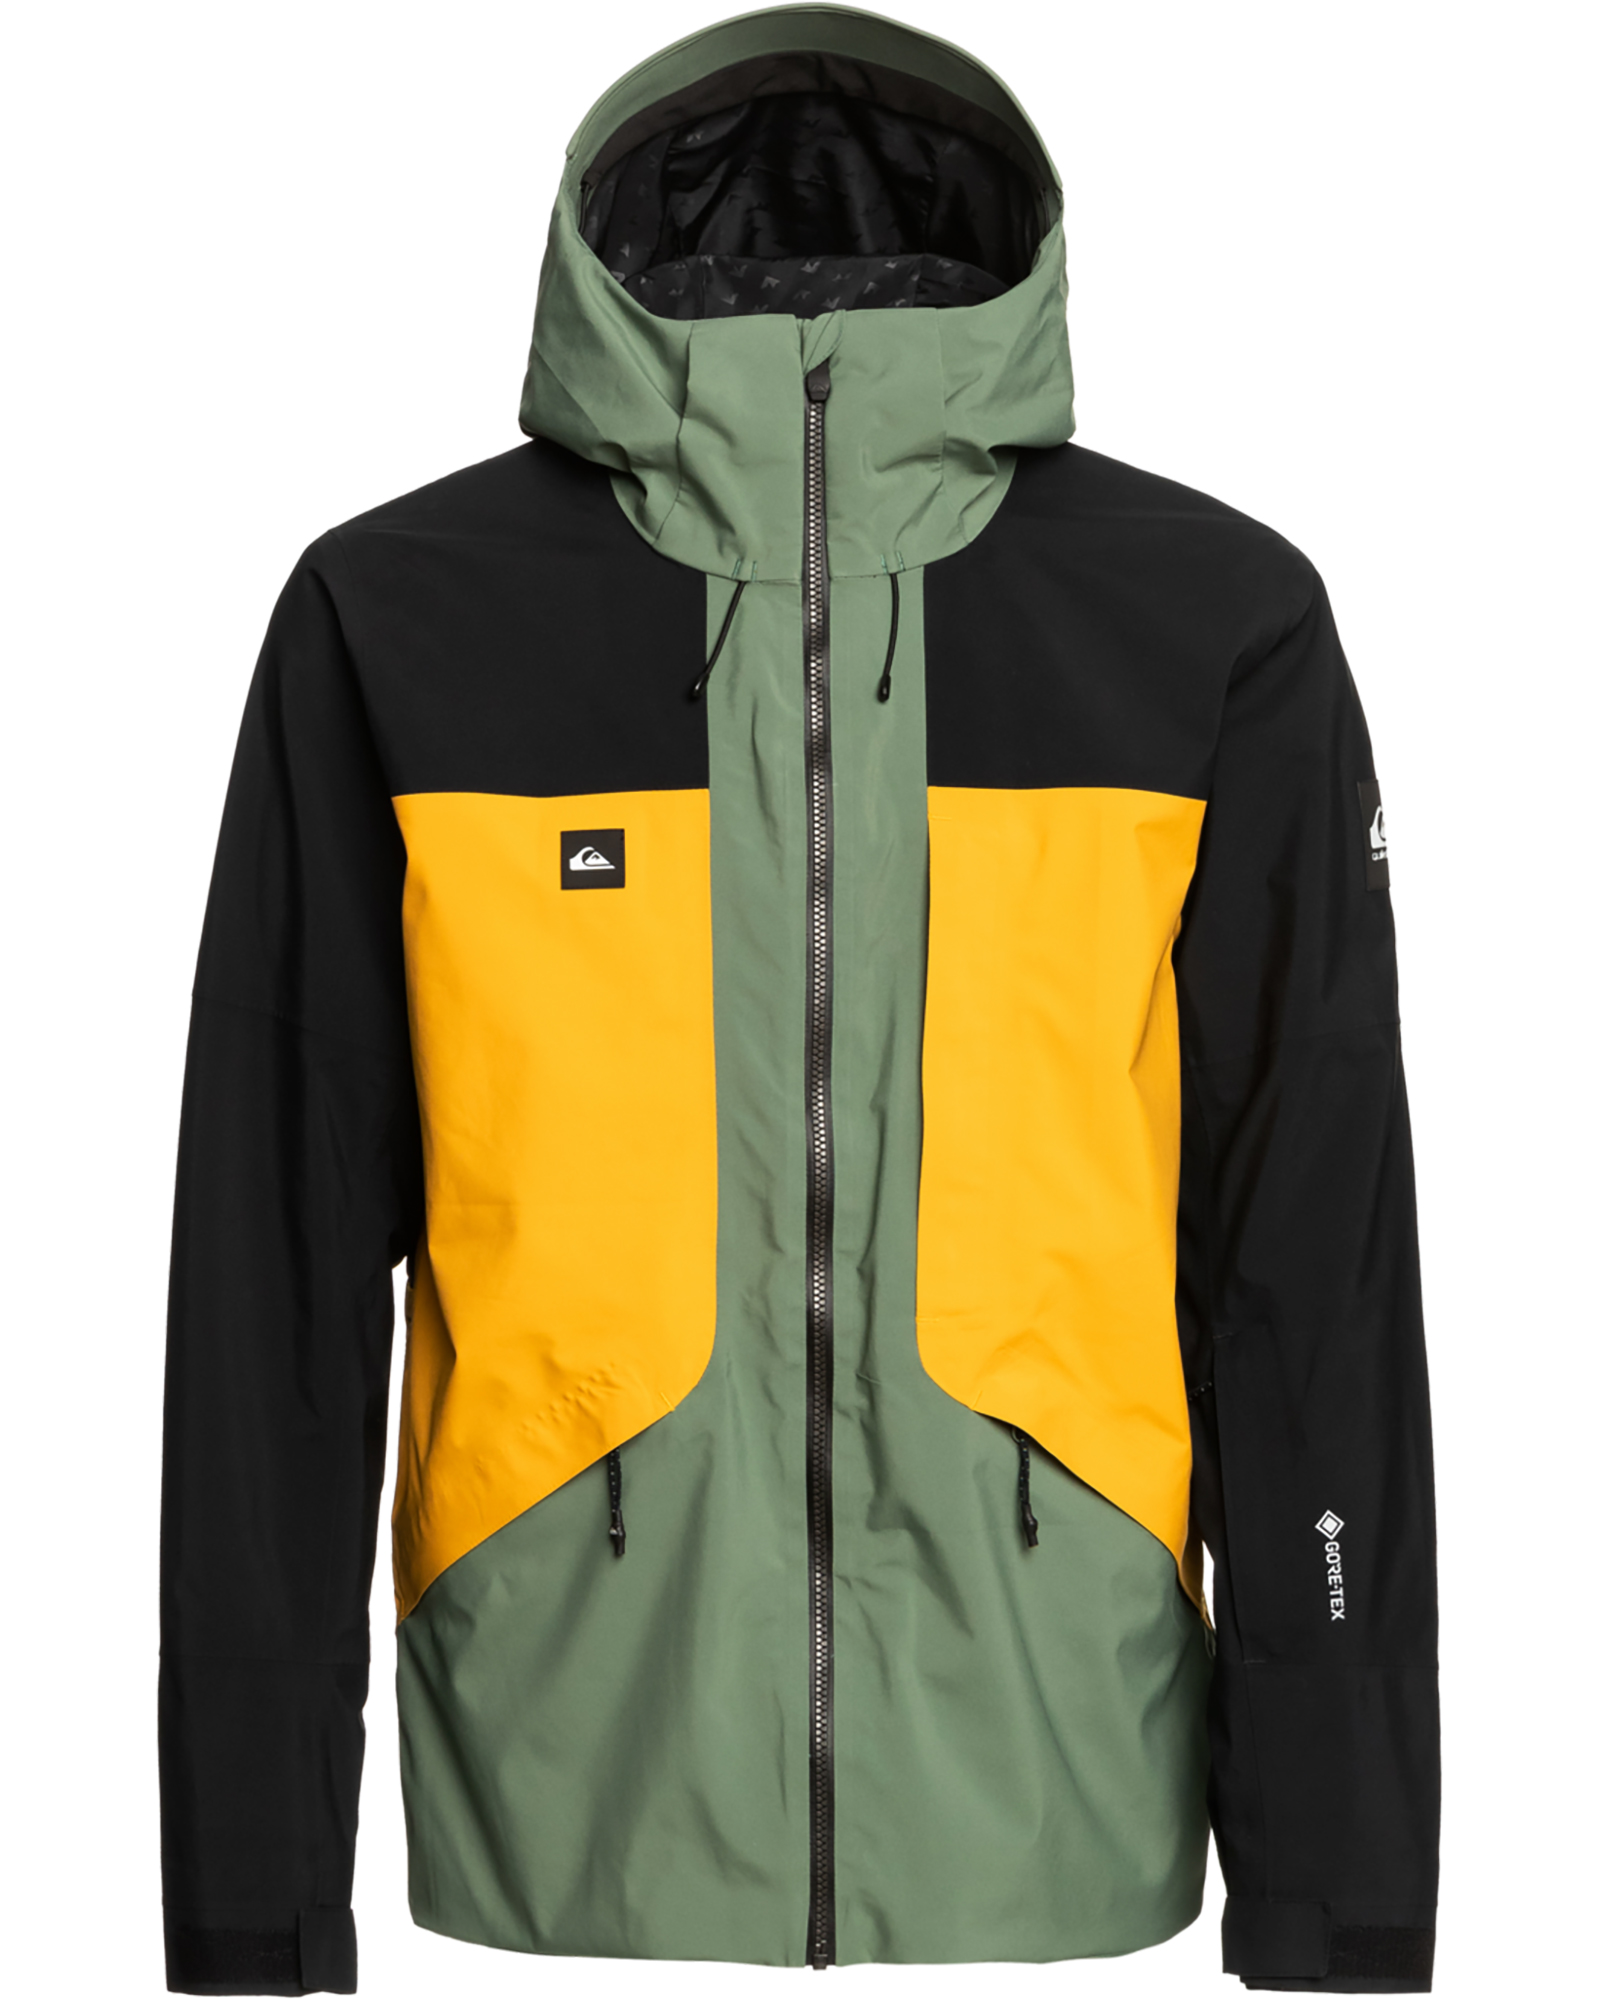 Quiksilver Forever Stretch GORE TEX Insulated Men’s Jacket - Laurel Wreath/Mineral Yellow/Black XL